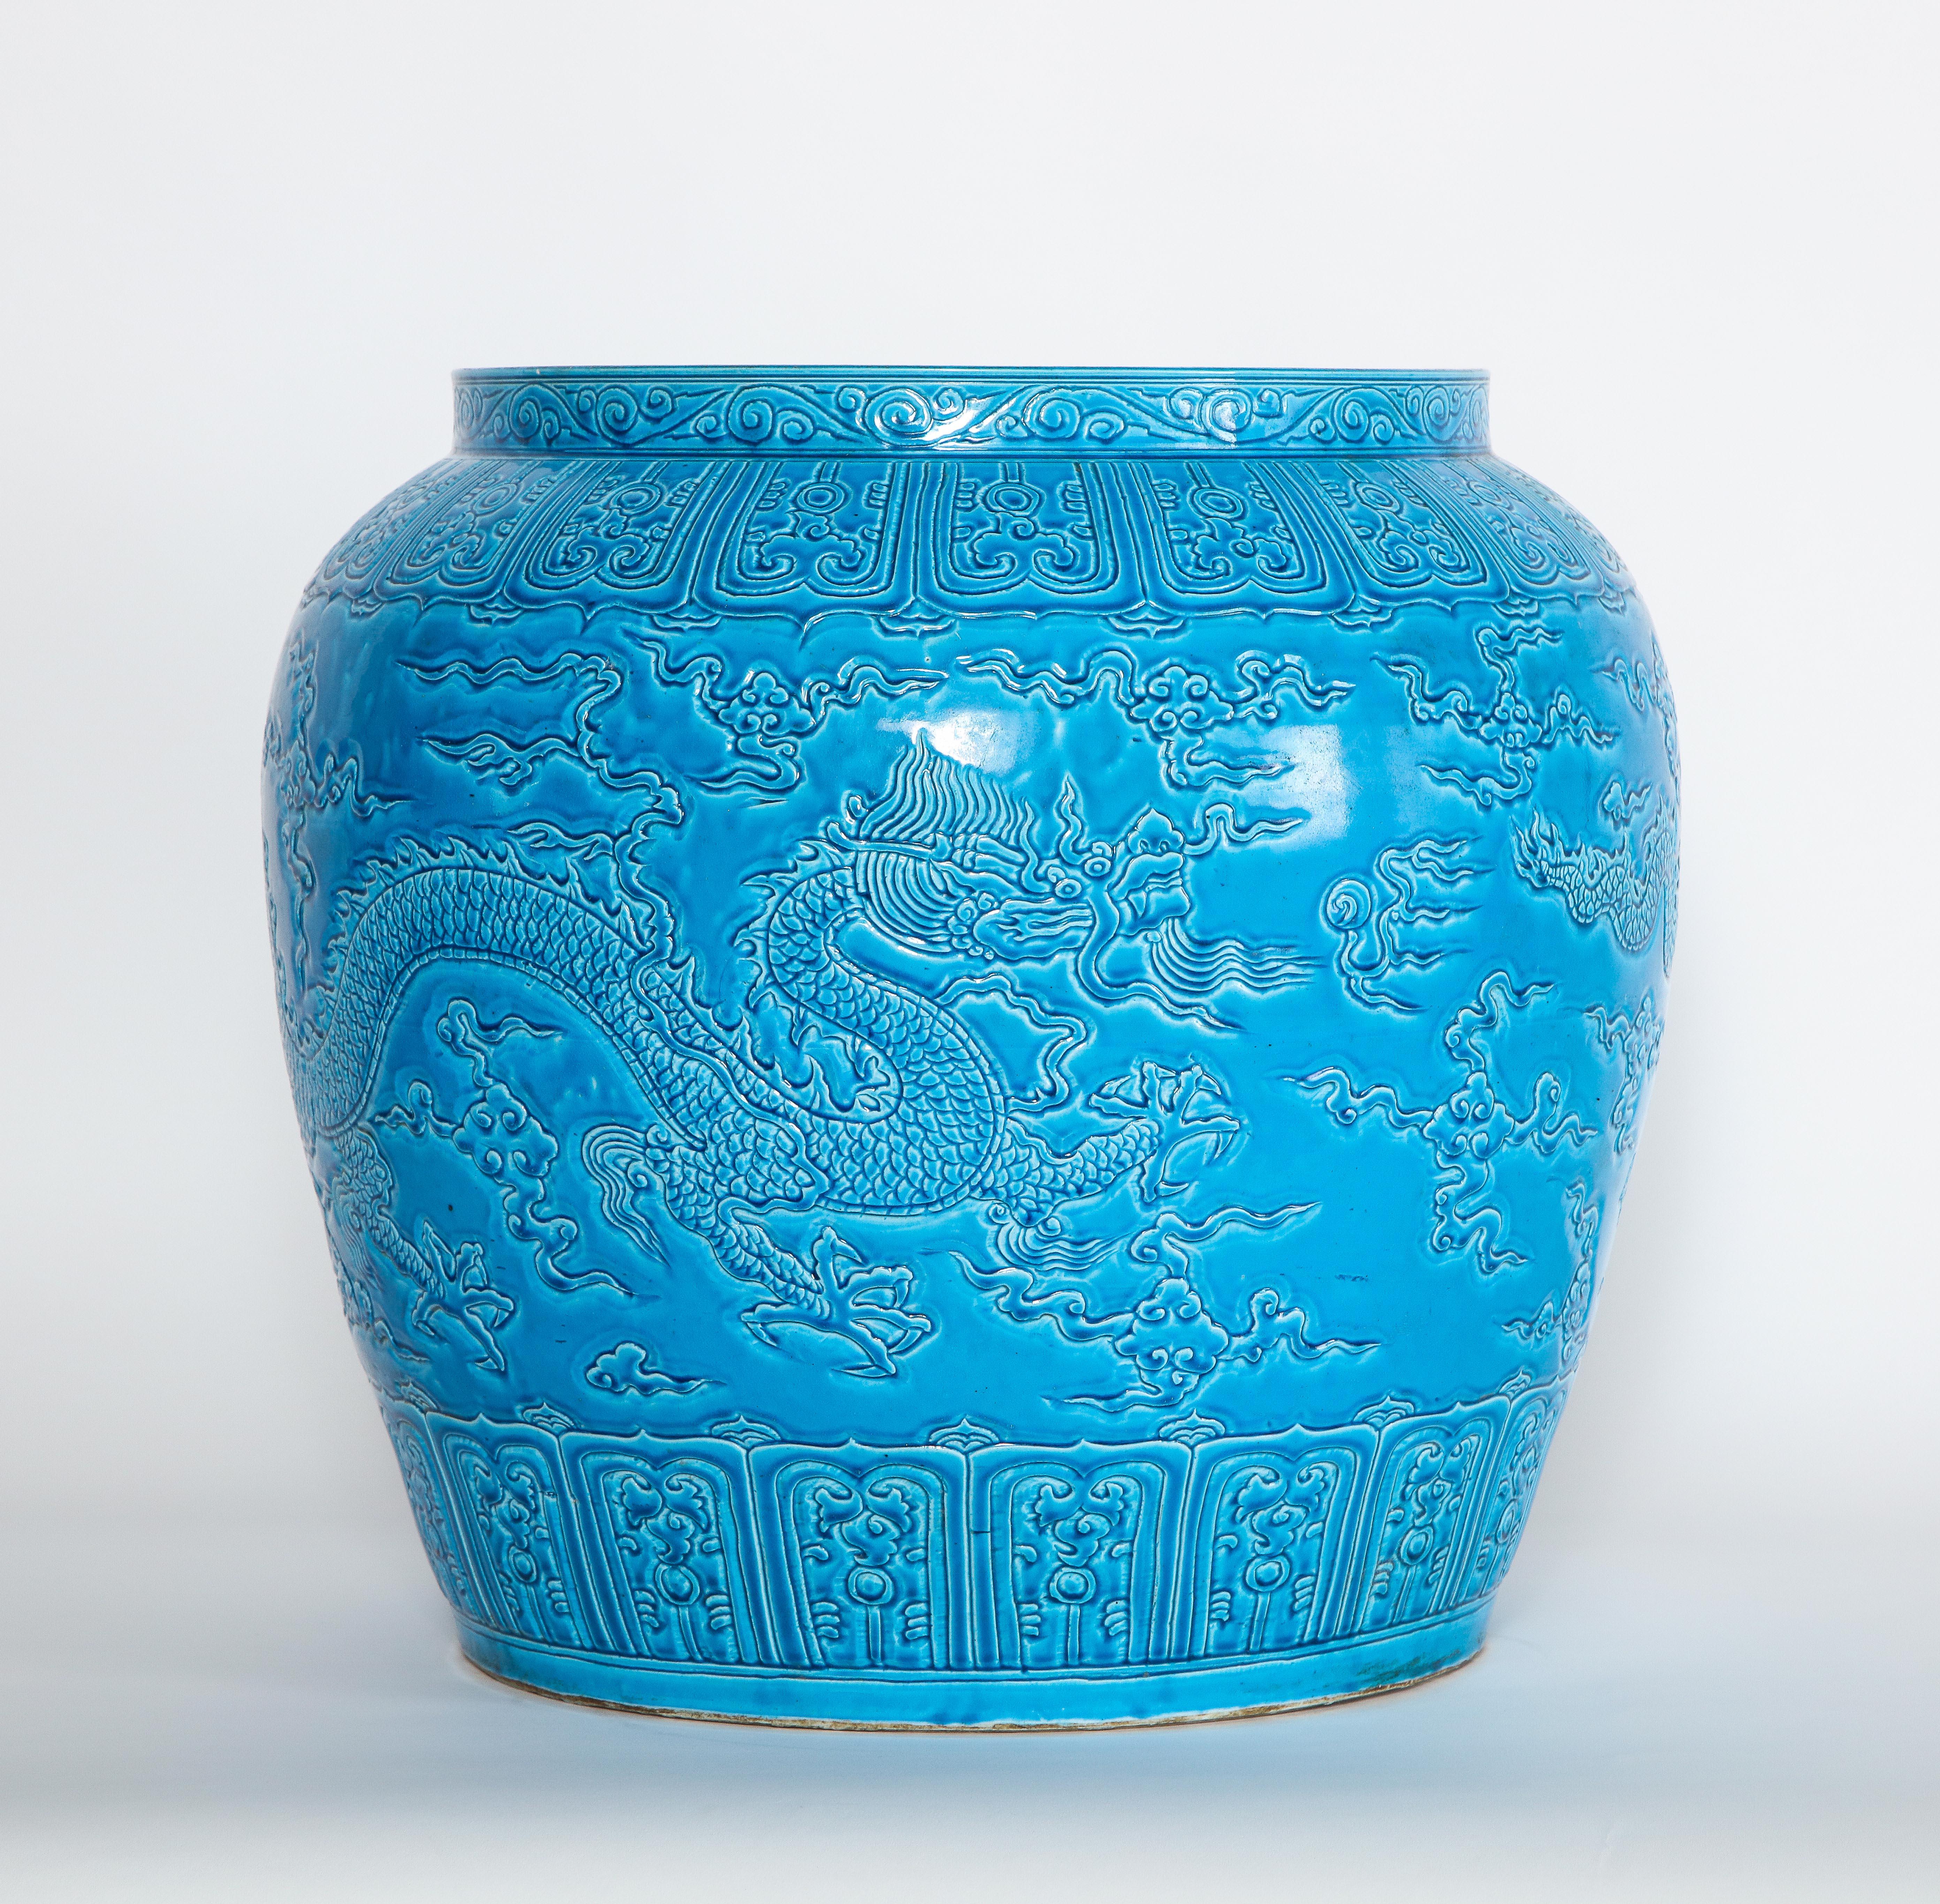 A fabulous and large Chinese 19th century turquoise blue ground five-claw dragon planter/jardinière. Beautifully hand carved, this Chinese planter expresses imperial quality, as only the emperor could have a five-claw dragon object made for him. The